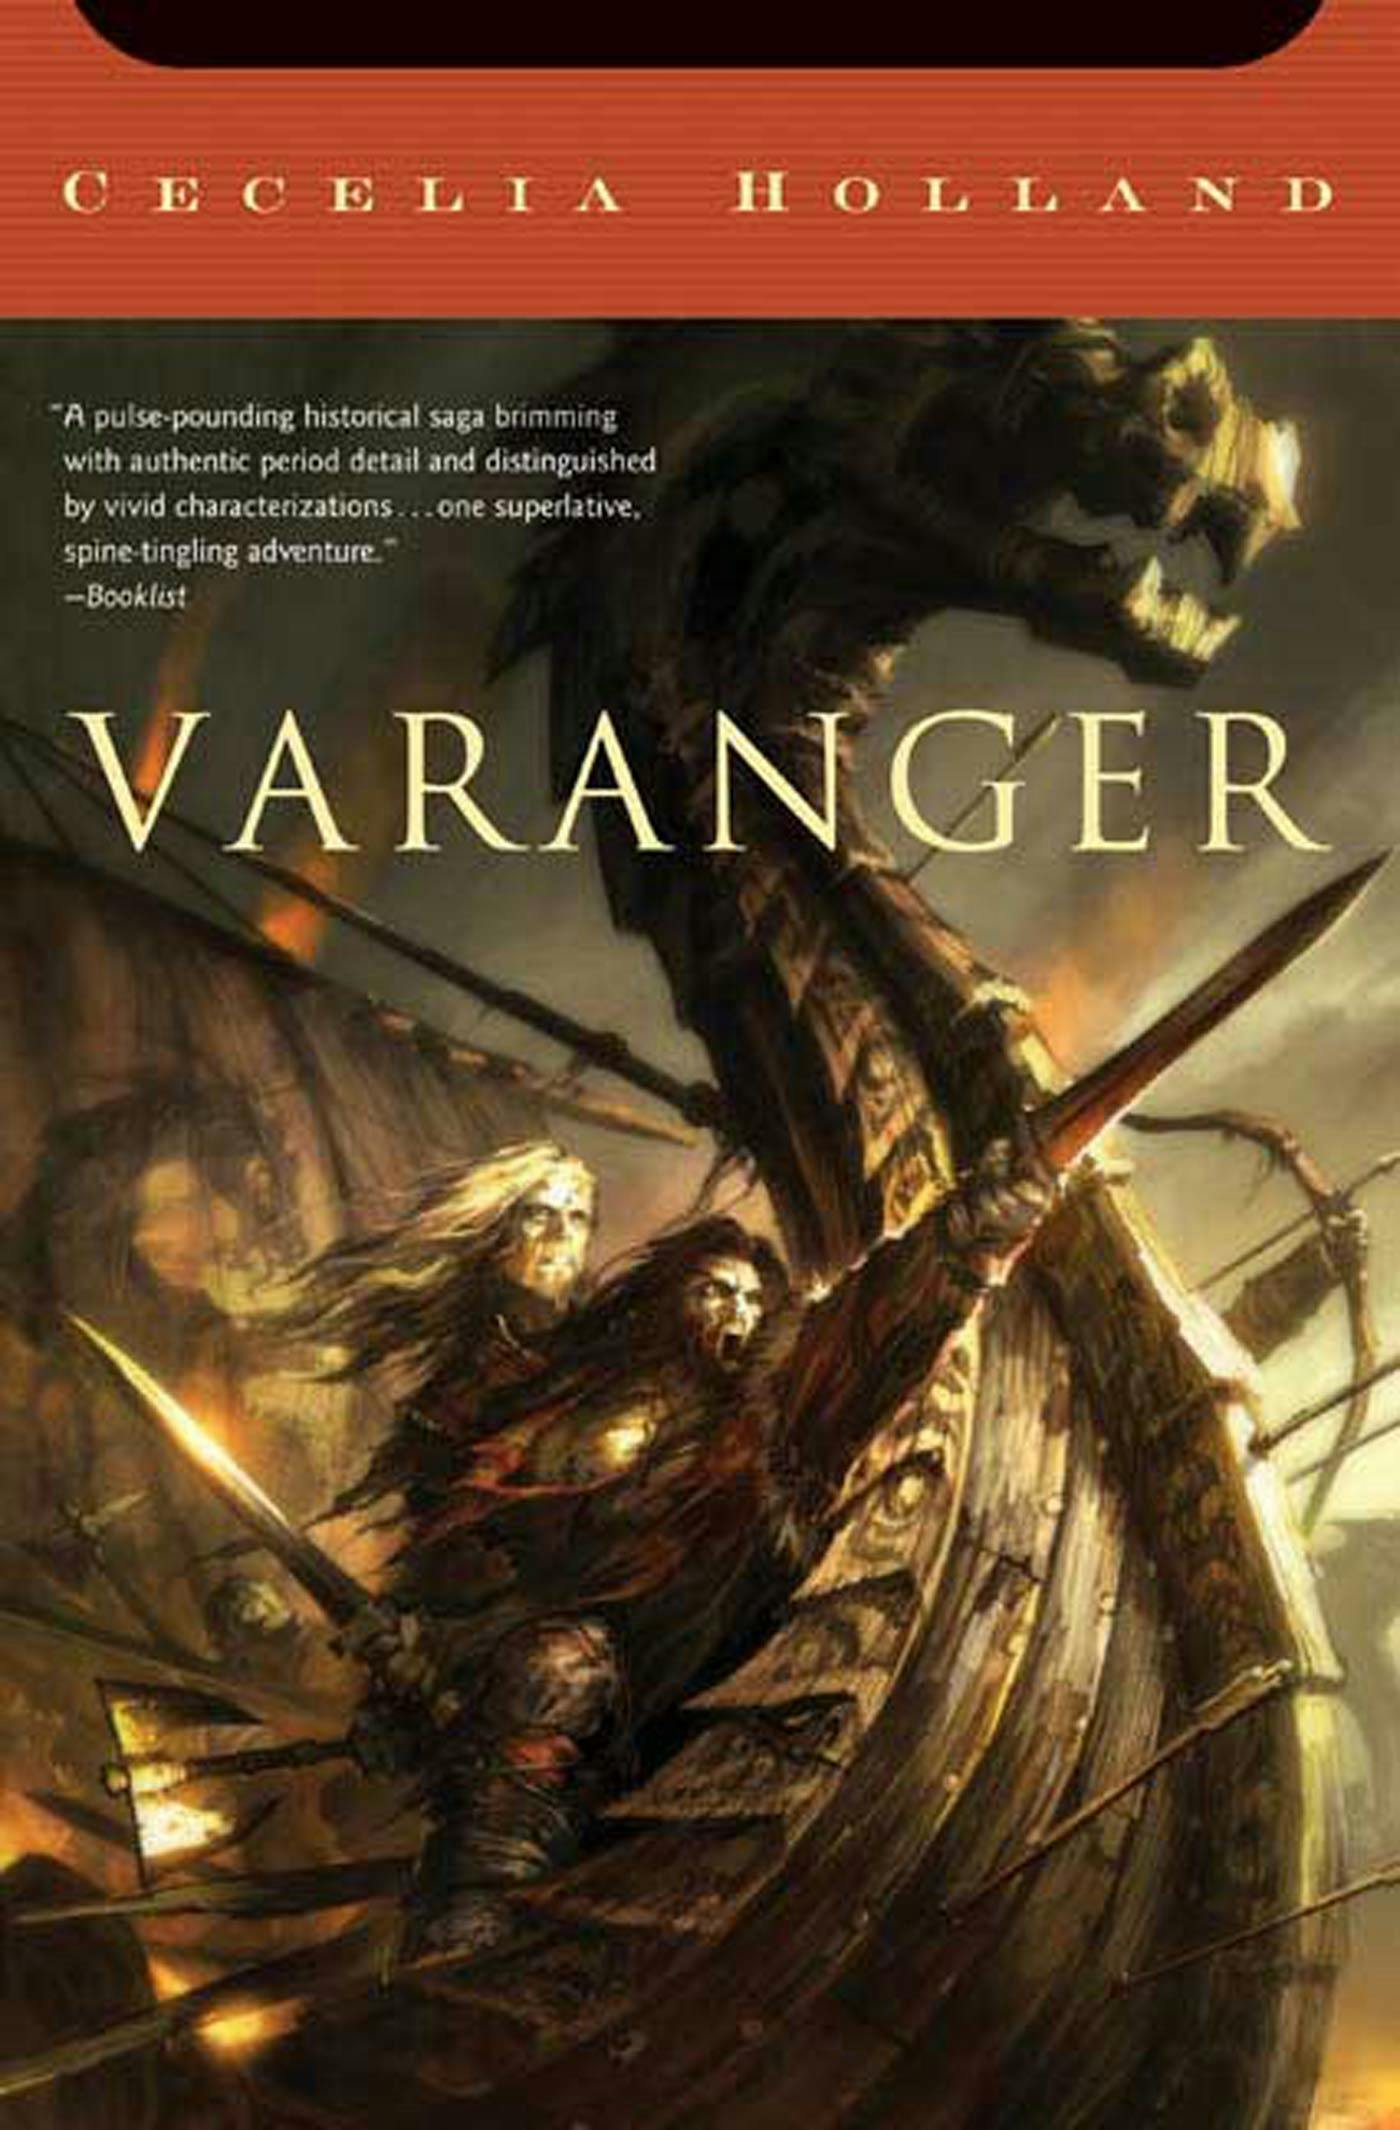 Cover for the book titled as: Varanger